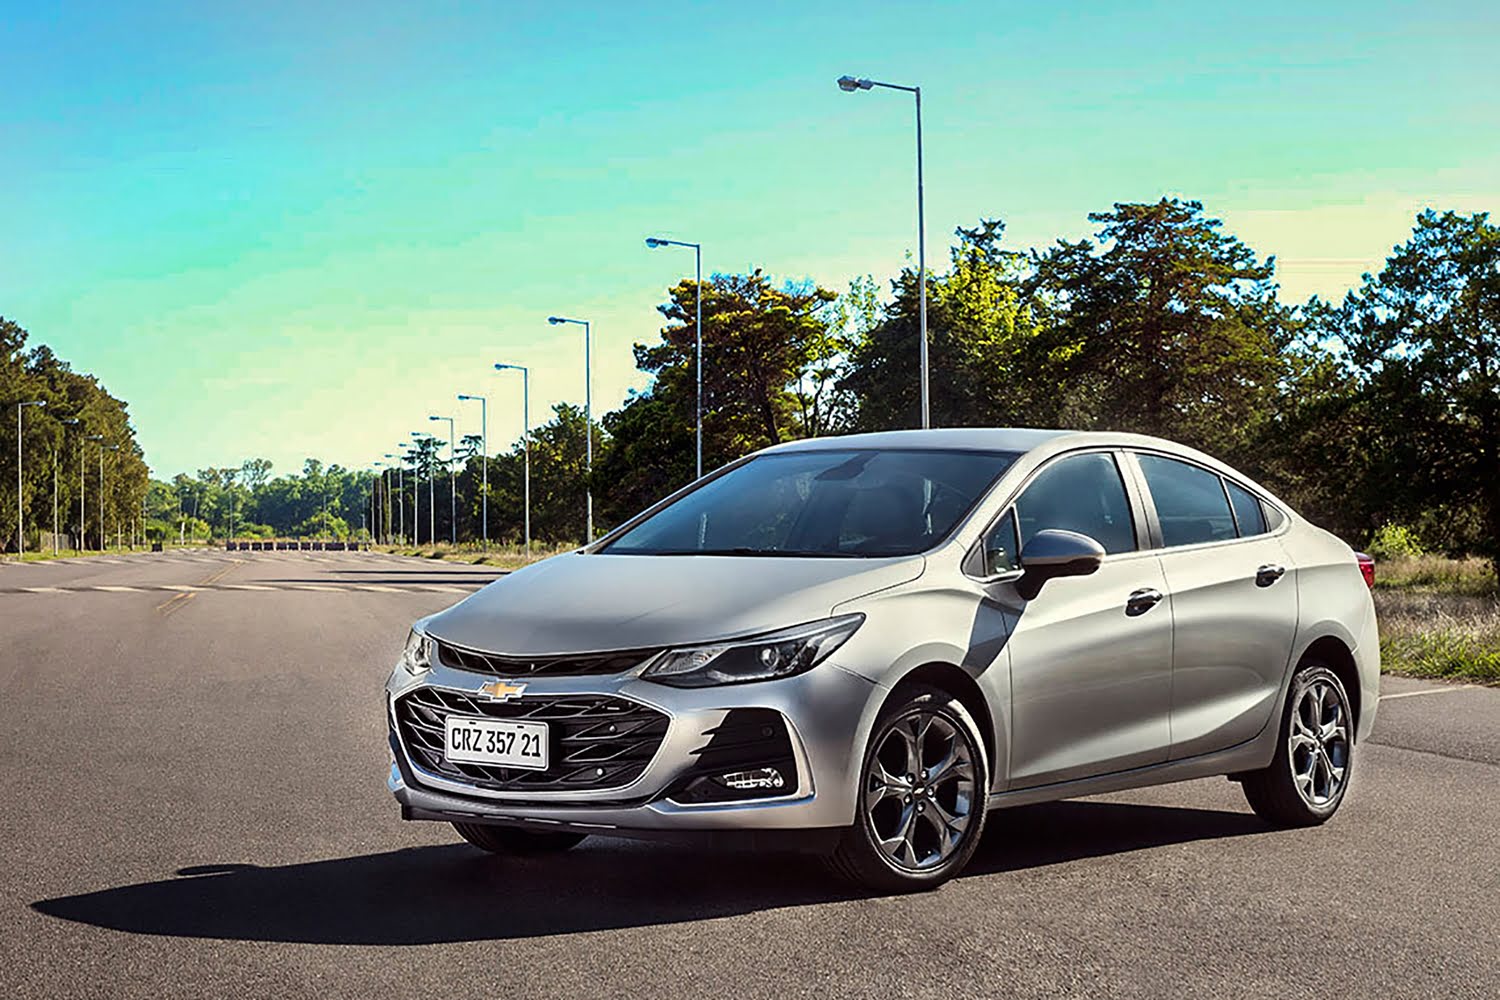 GM Launches 2021 Chevrolet Cruze In South America